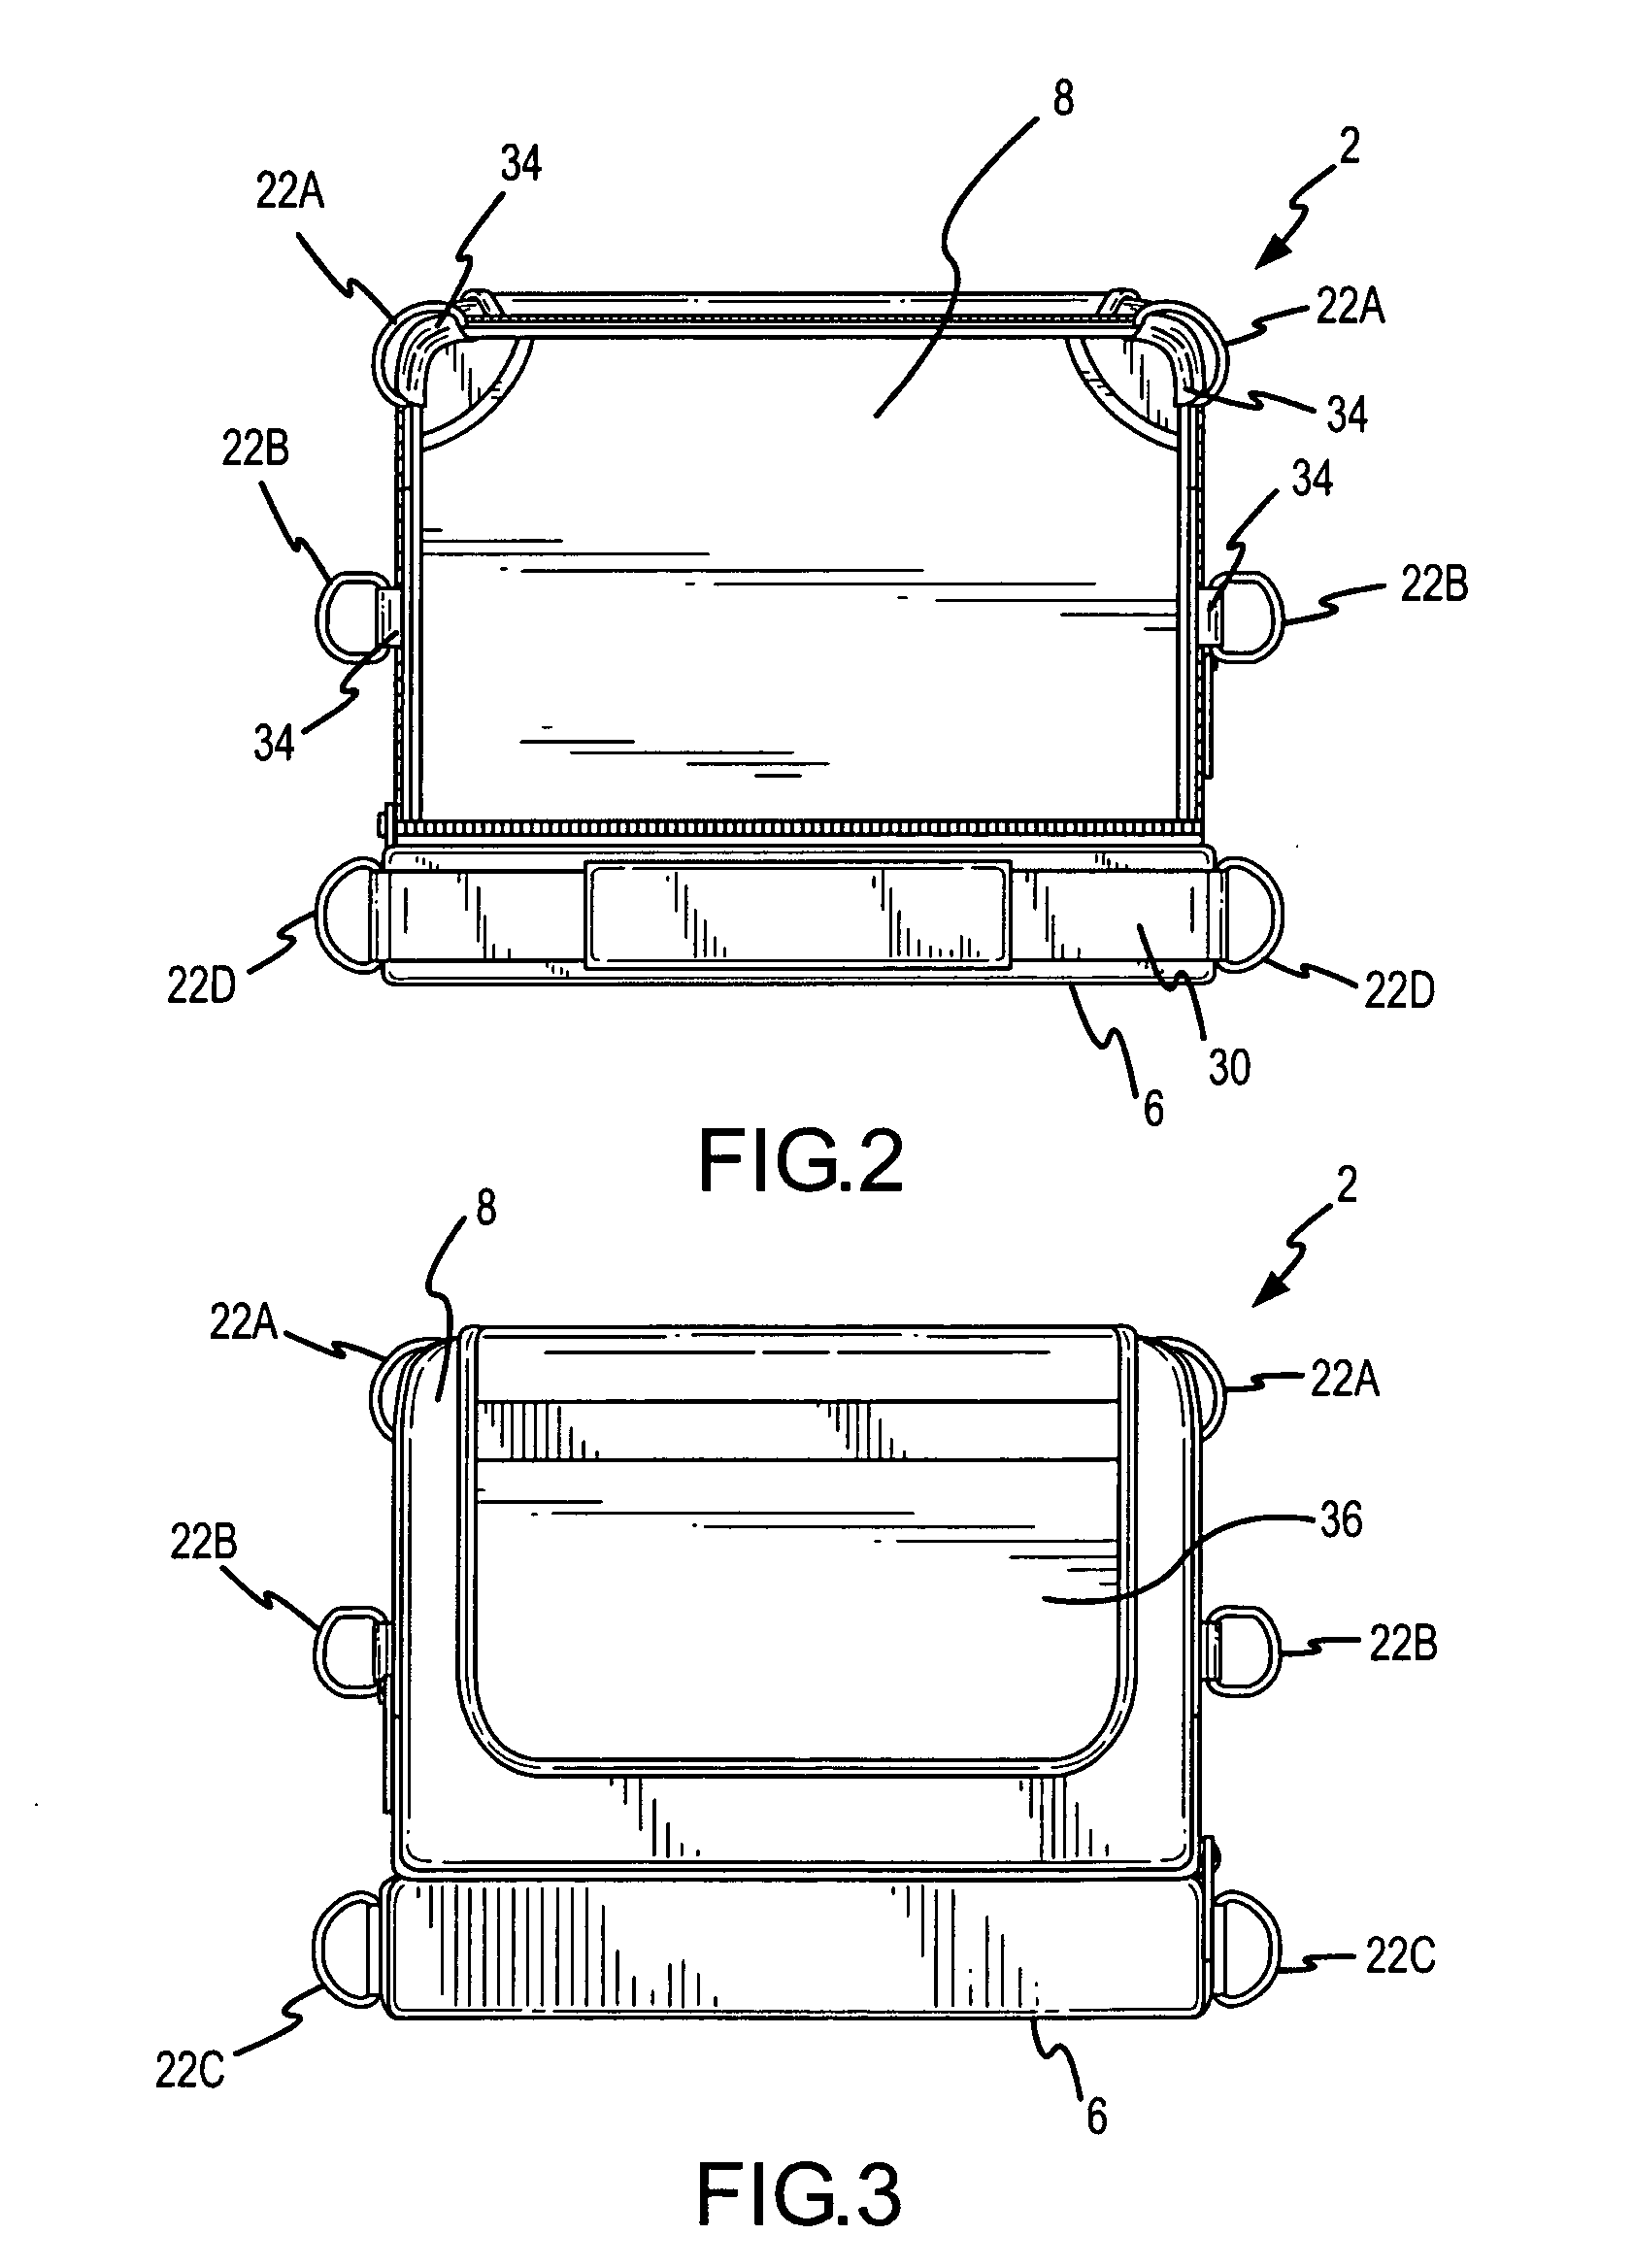 Entertainment device storage case adapted for interconnection to a vehicle seat